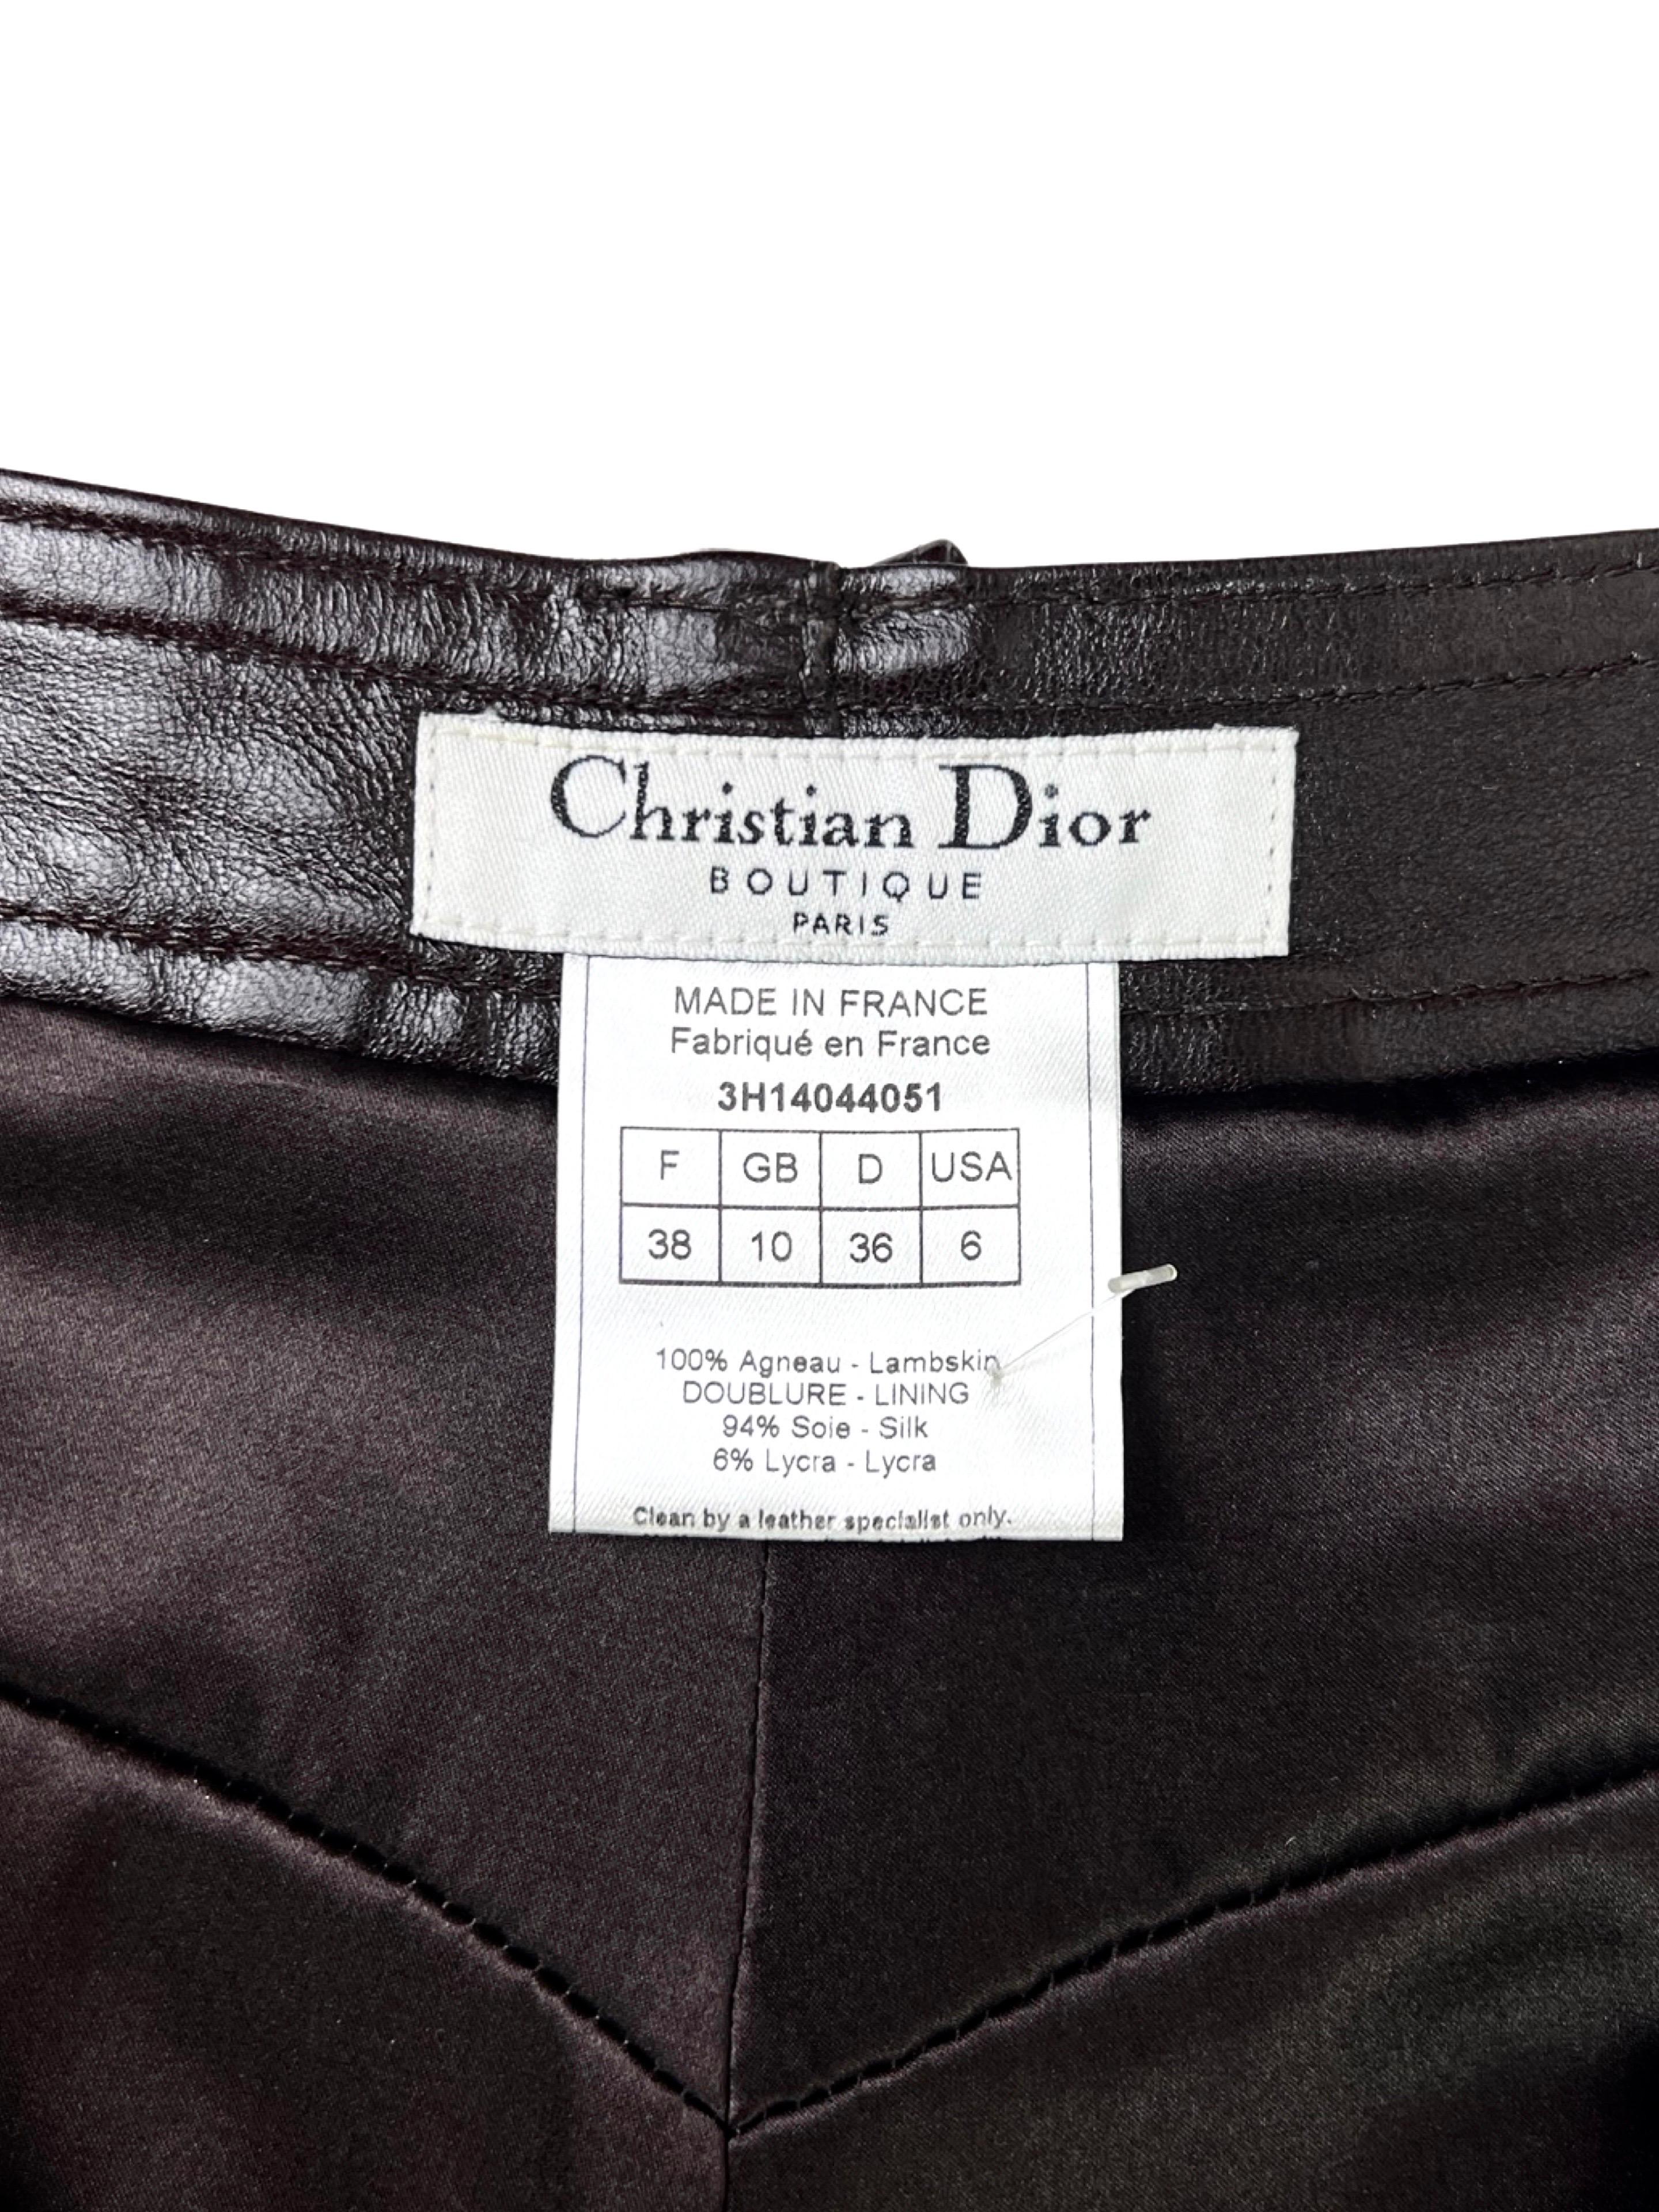 Dior by John Galliano Fall 2003 Leather Lace-Up Pants in Dark Chocolate For Sale 7